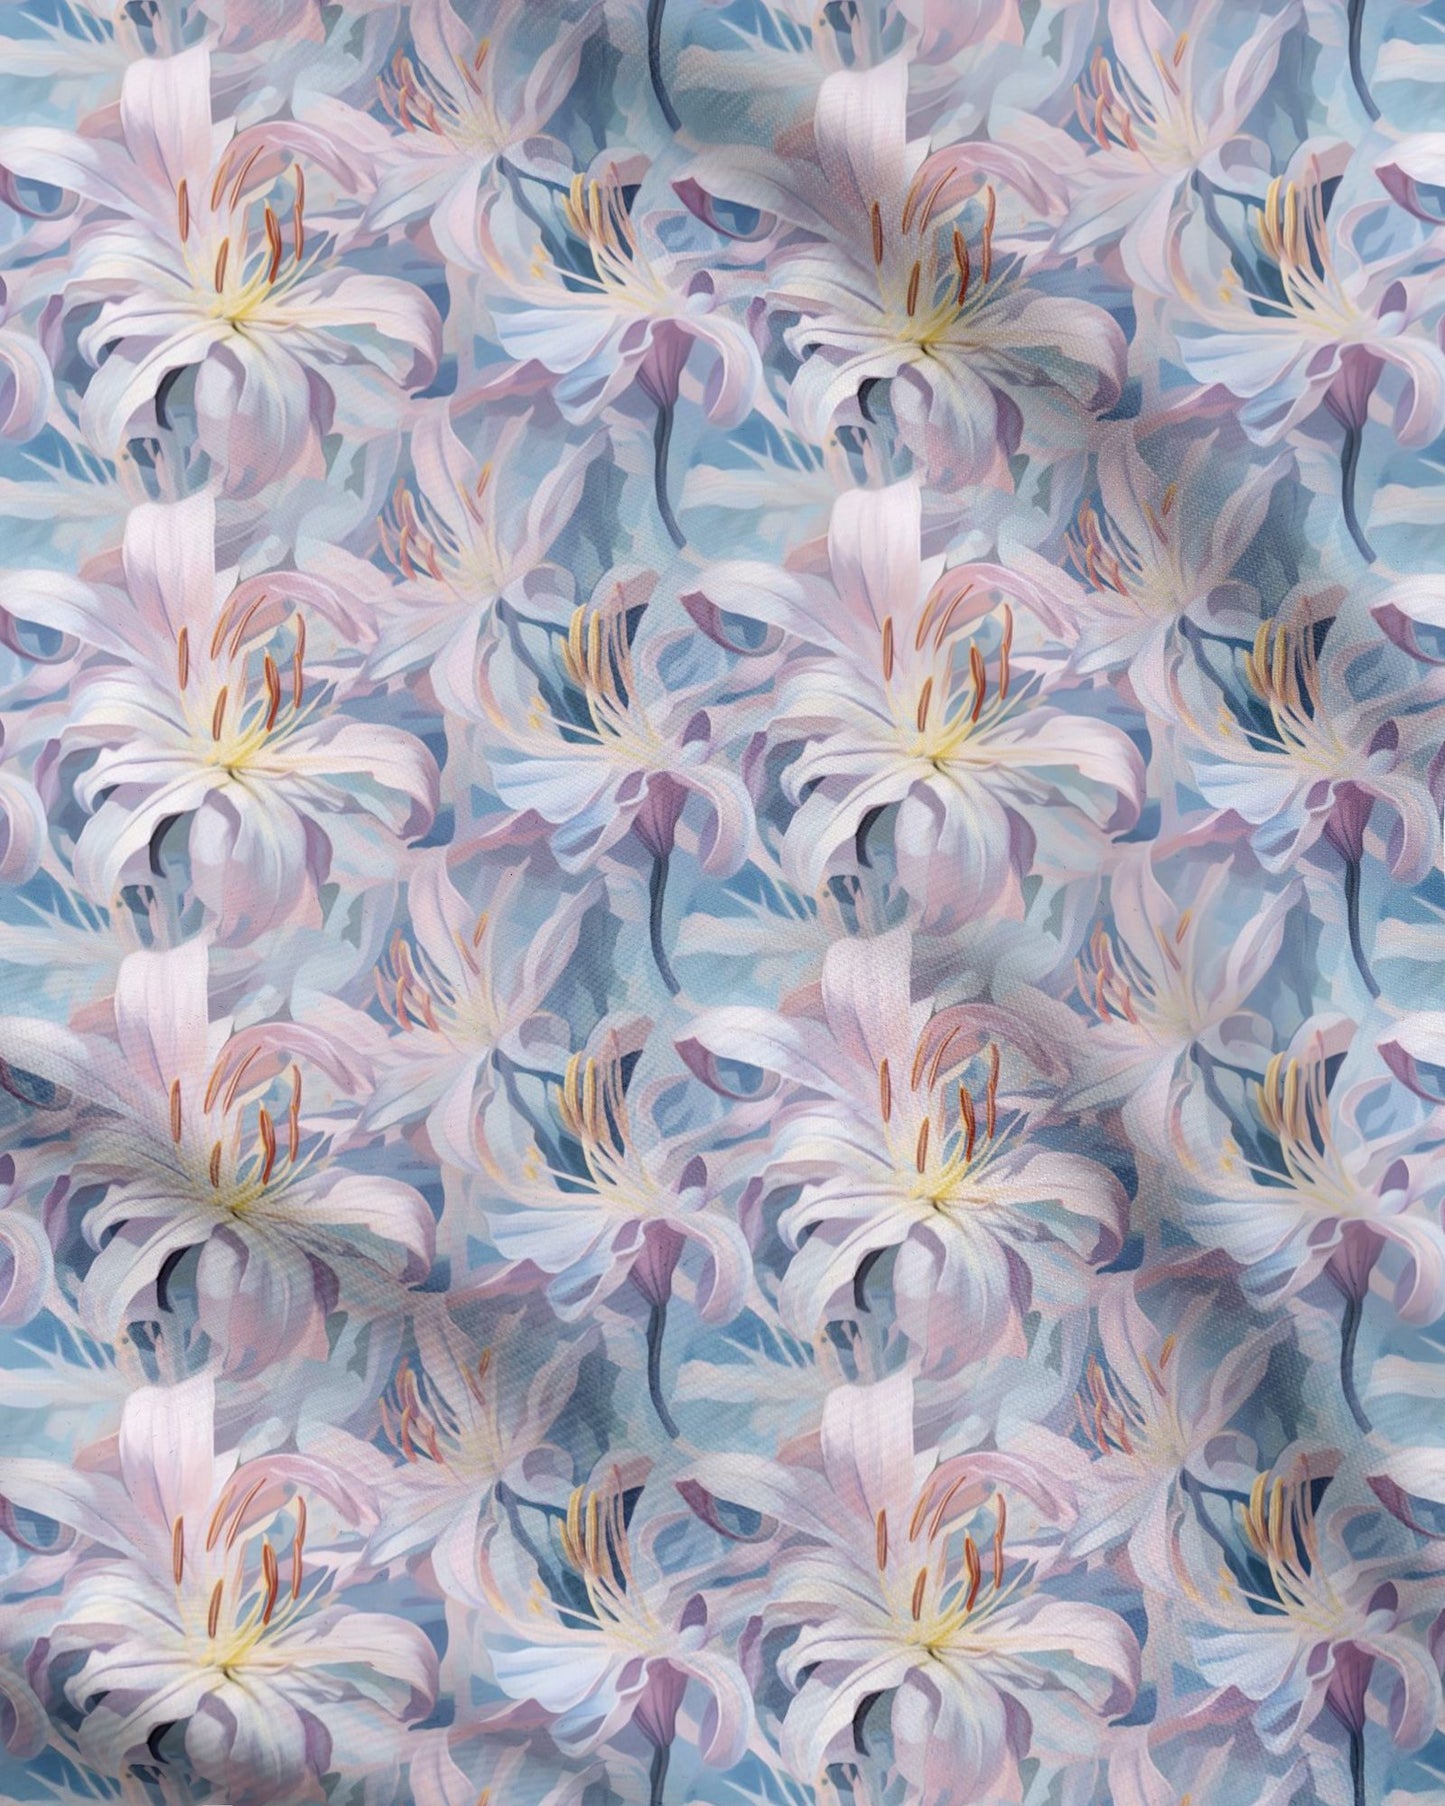 Springtime Lily Repeat Pattern Fabric